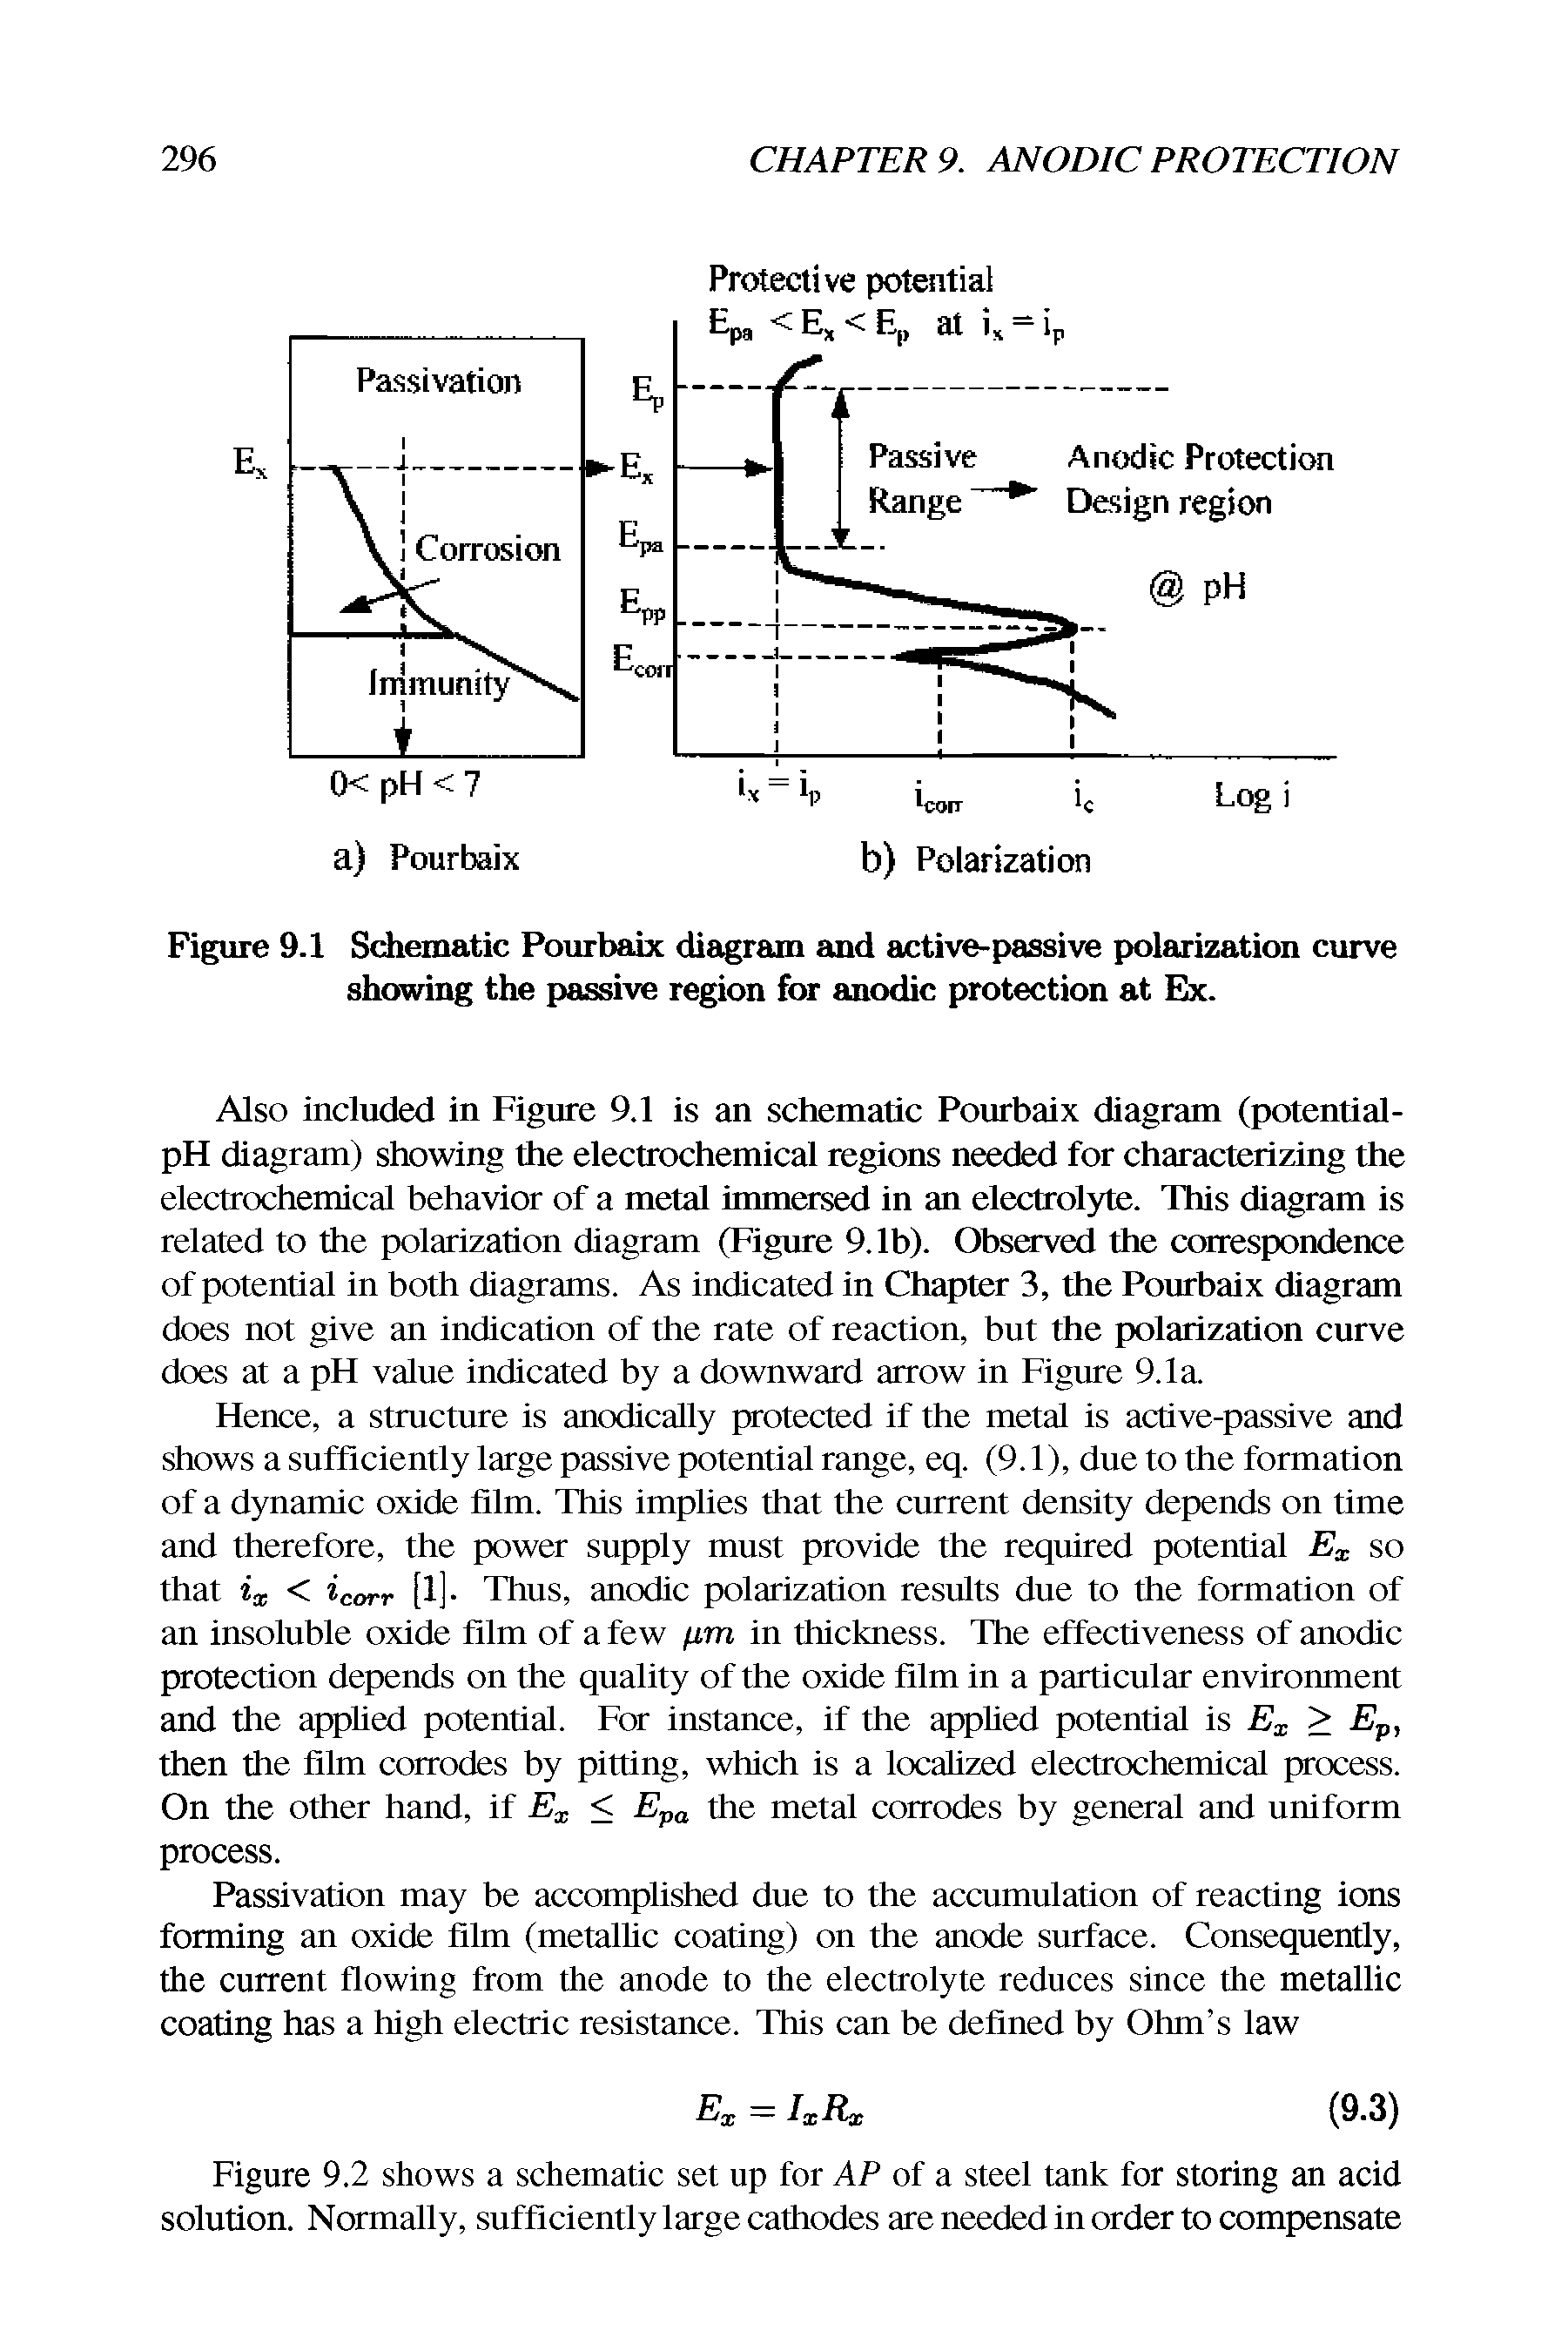 Figure 9.1 Schematic Pourbaix diagram and active-passive polarization curve showing the passive region for anodic protection at Ex.